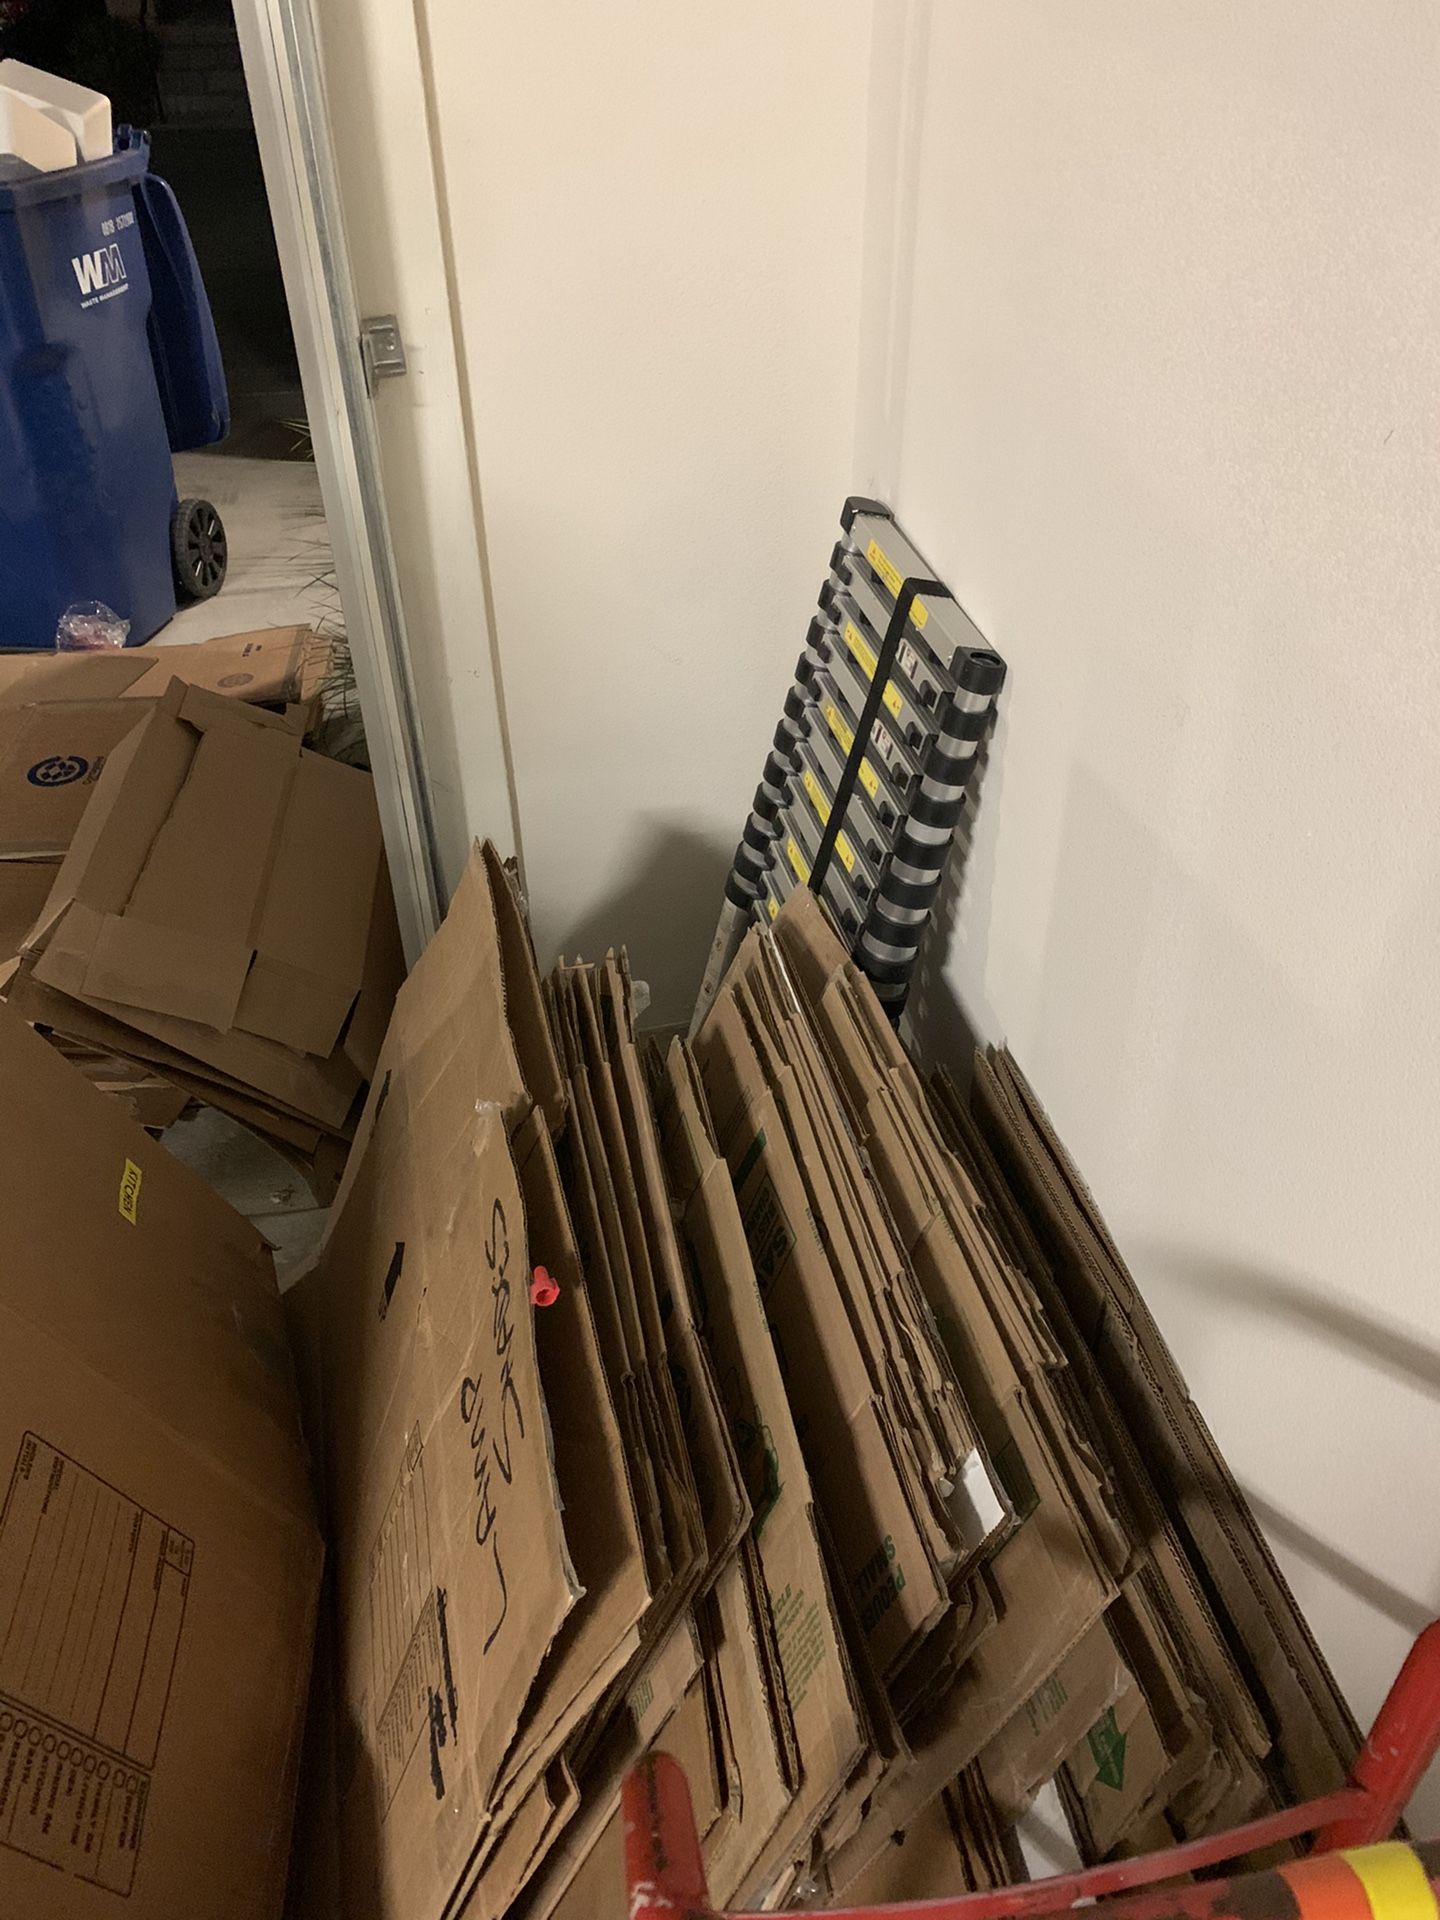 Free moving boxes and paper